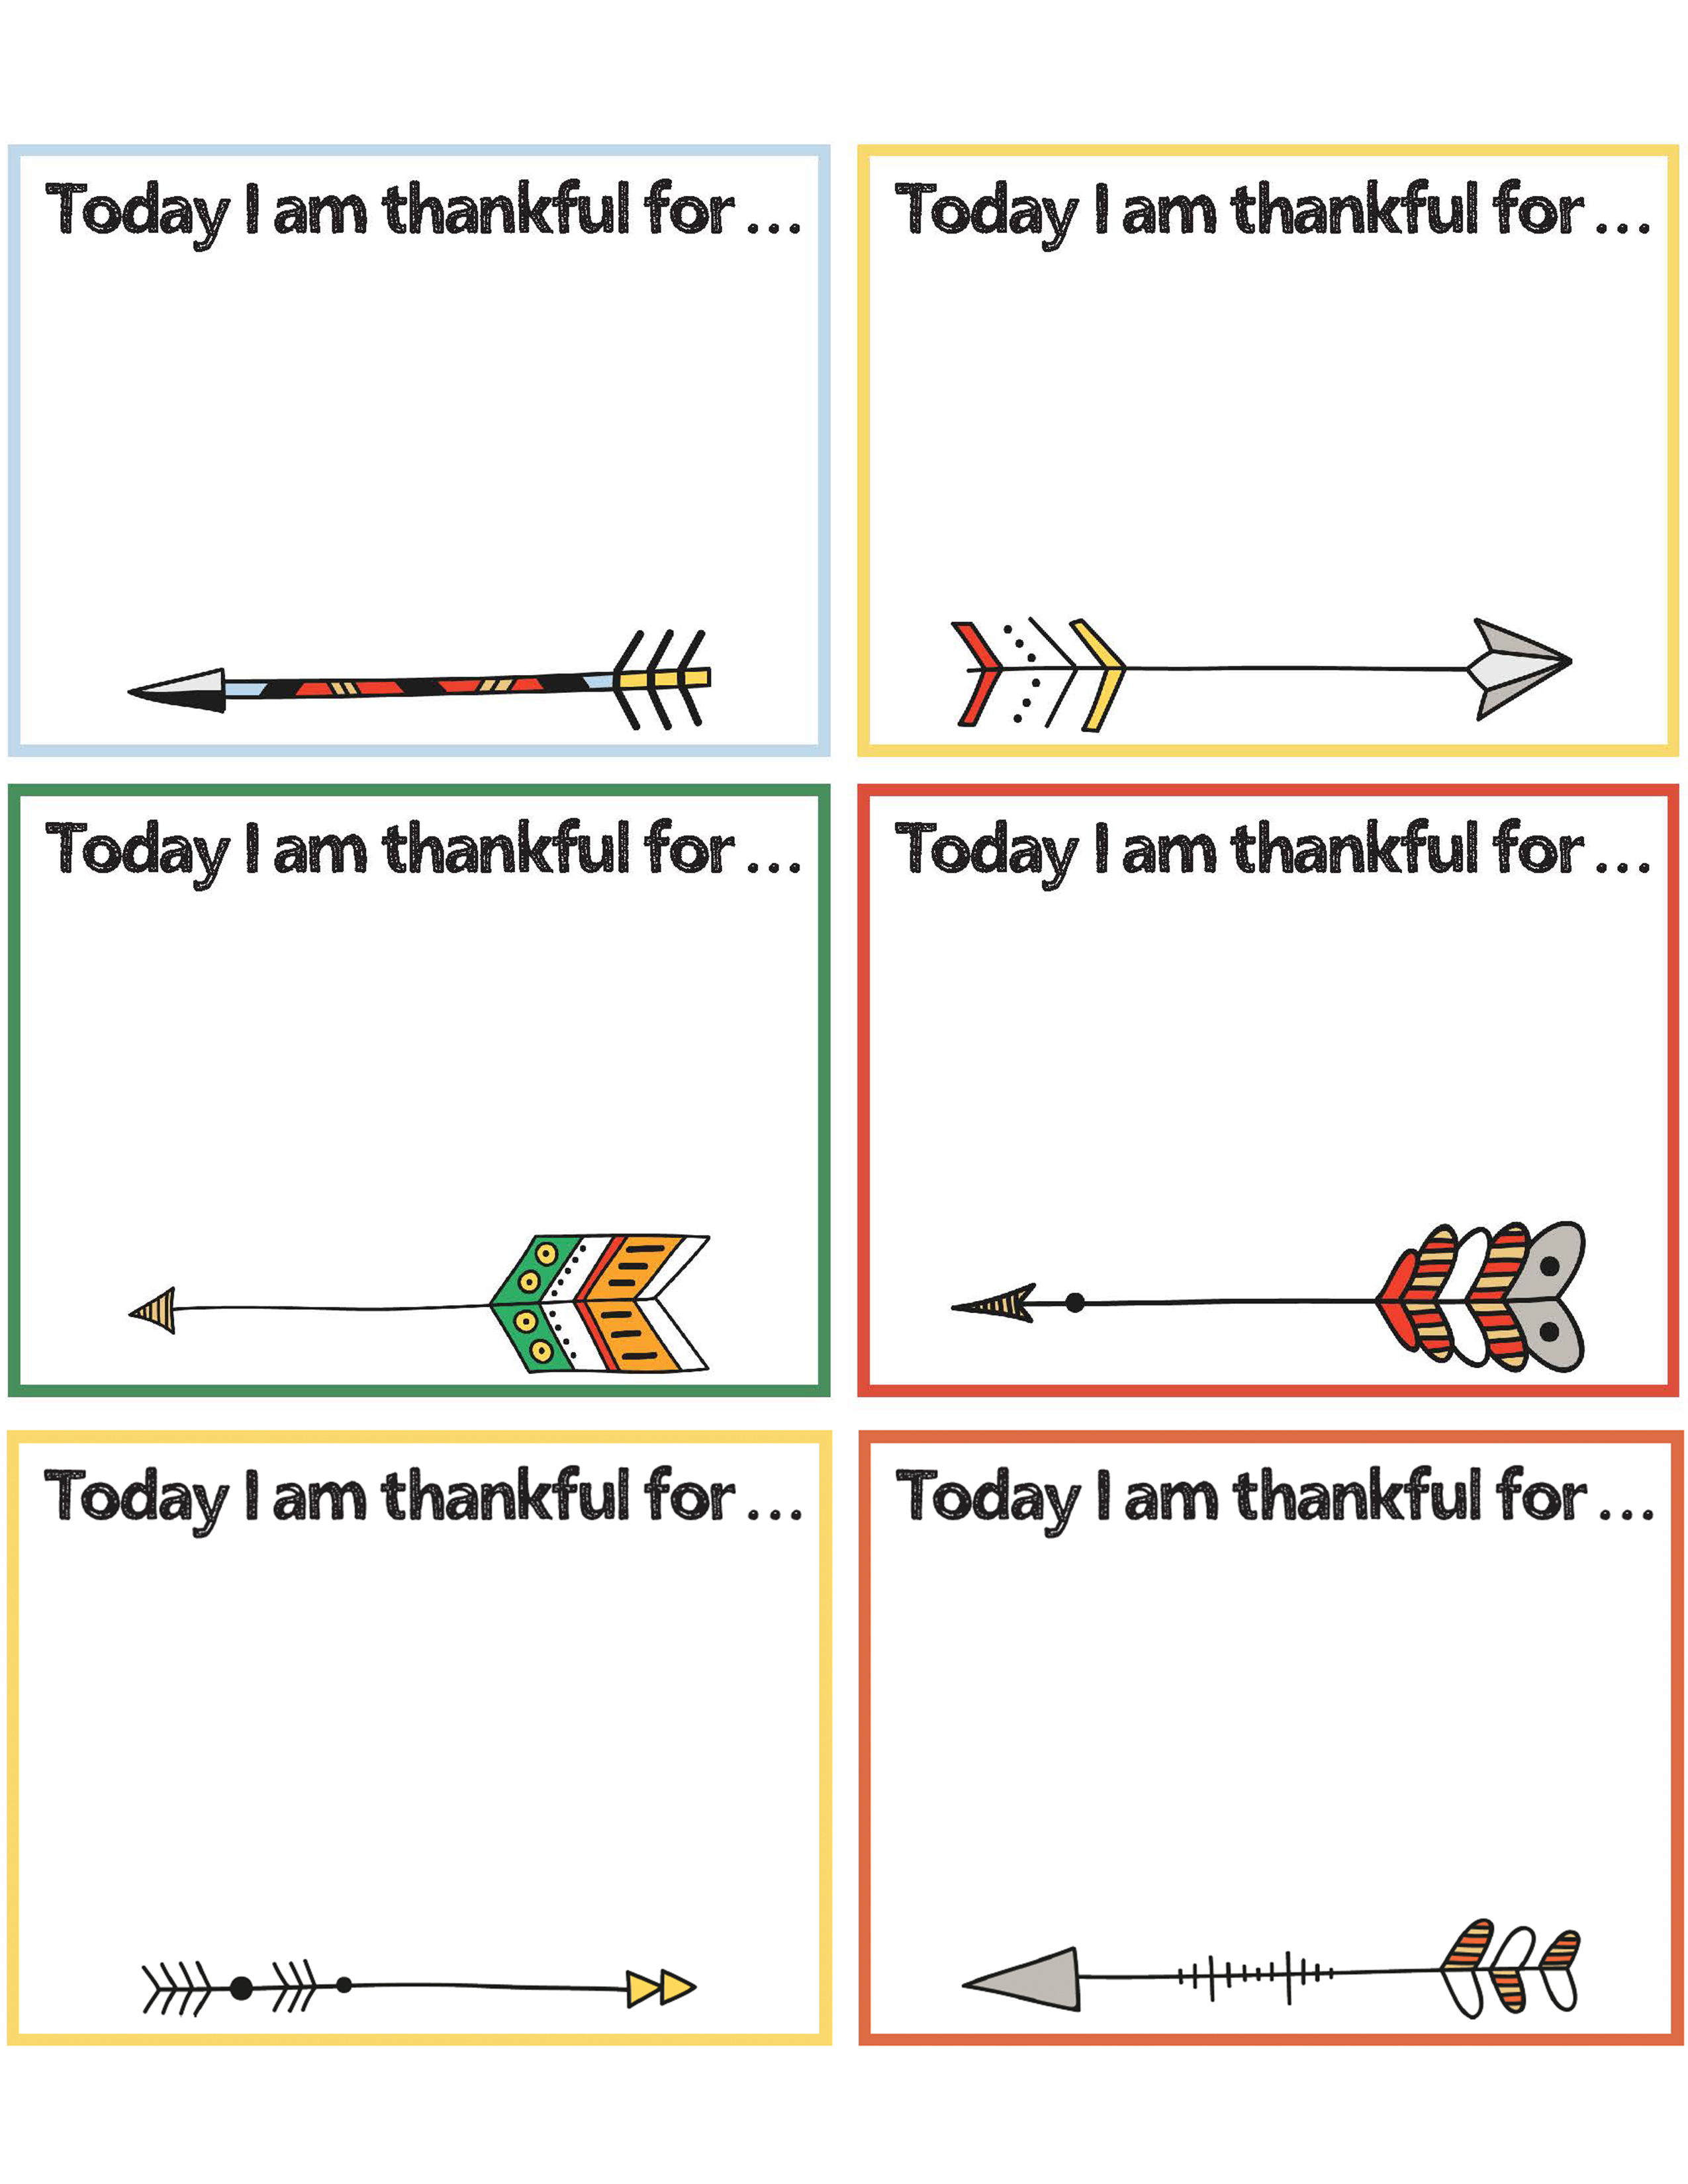 Free Printable Thankful Cards Activity for the Family With Printables